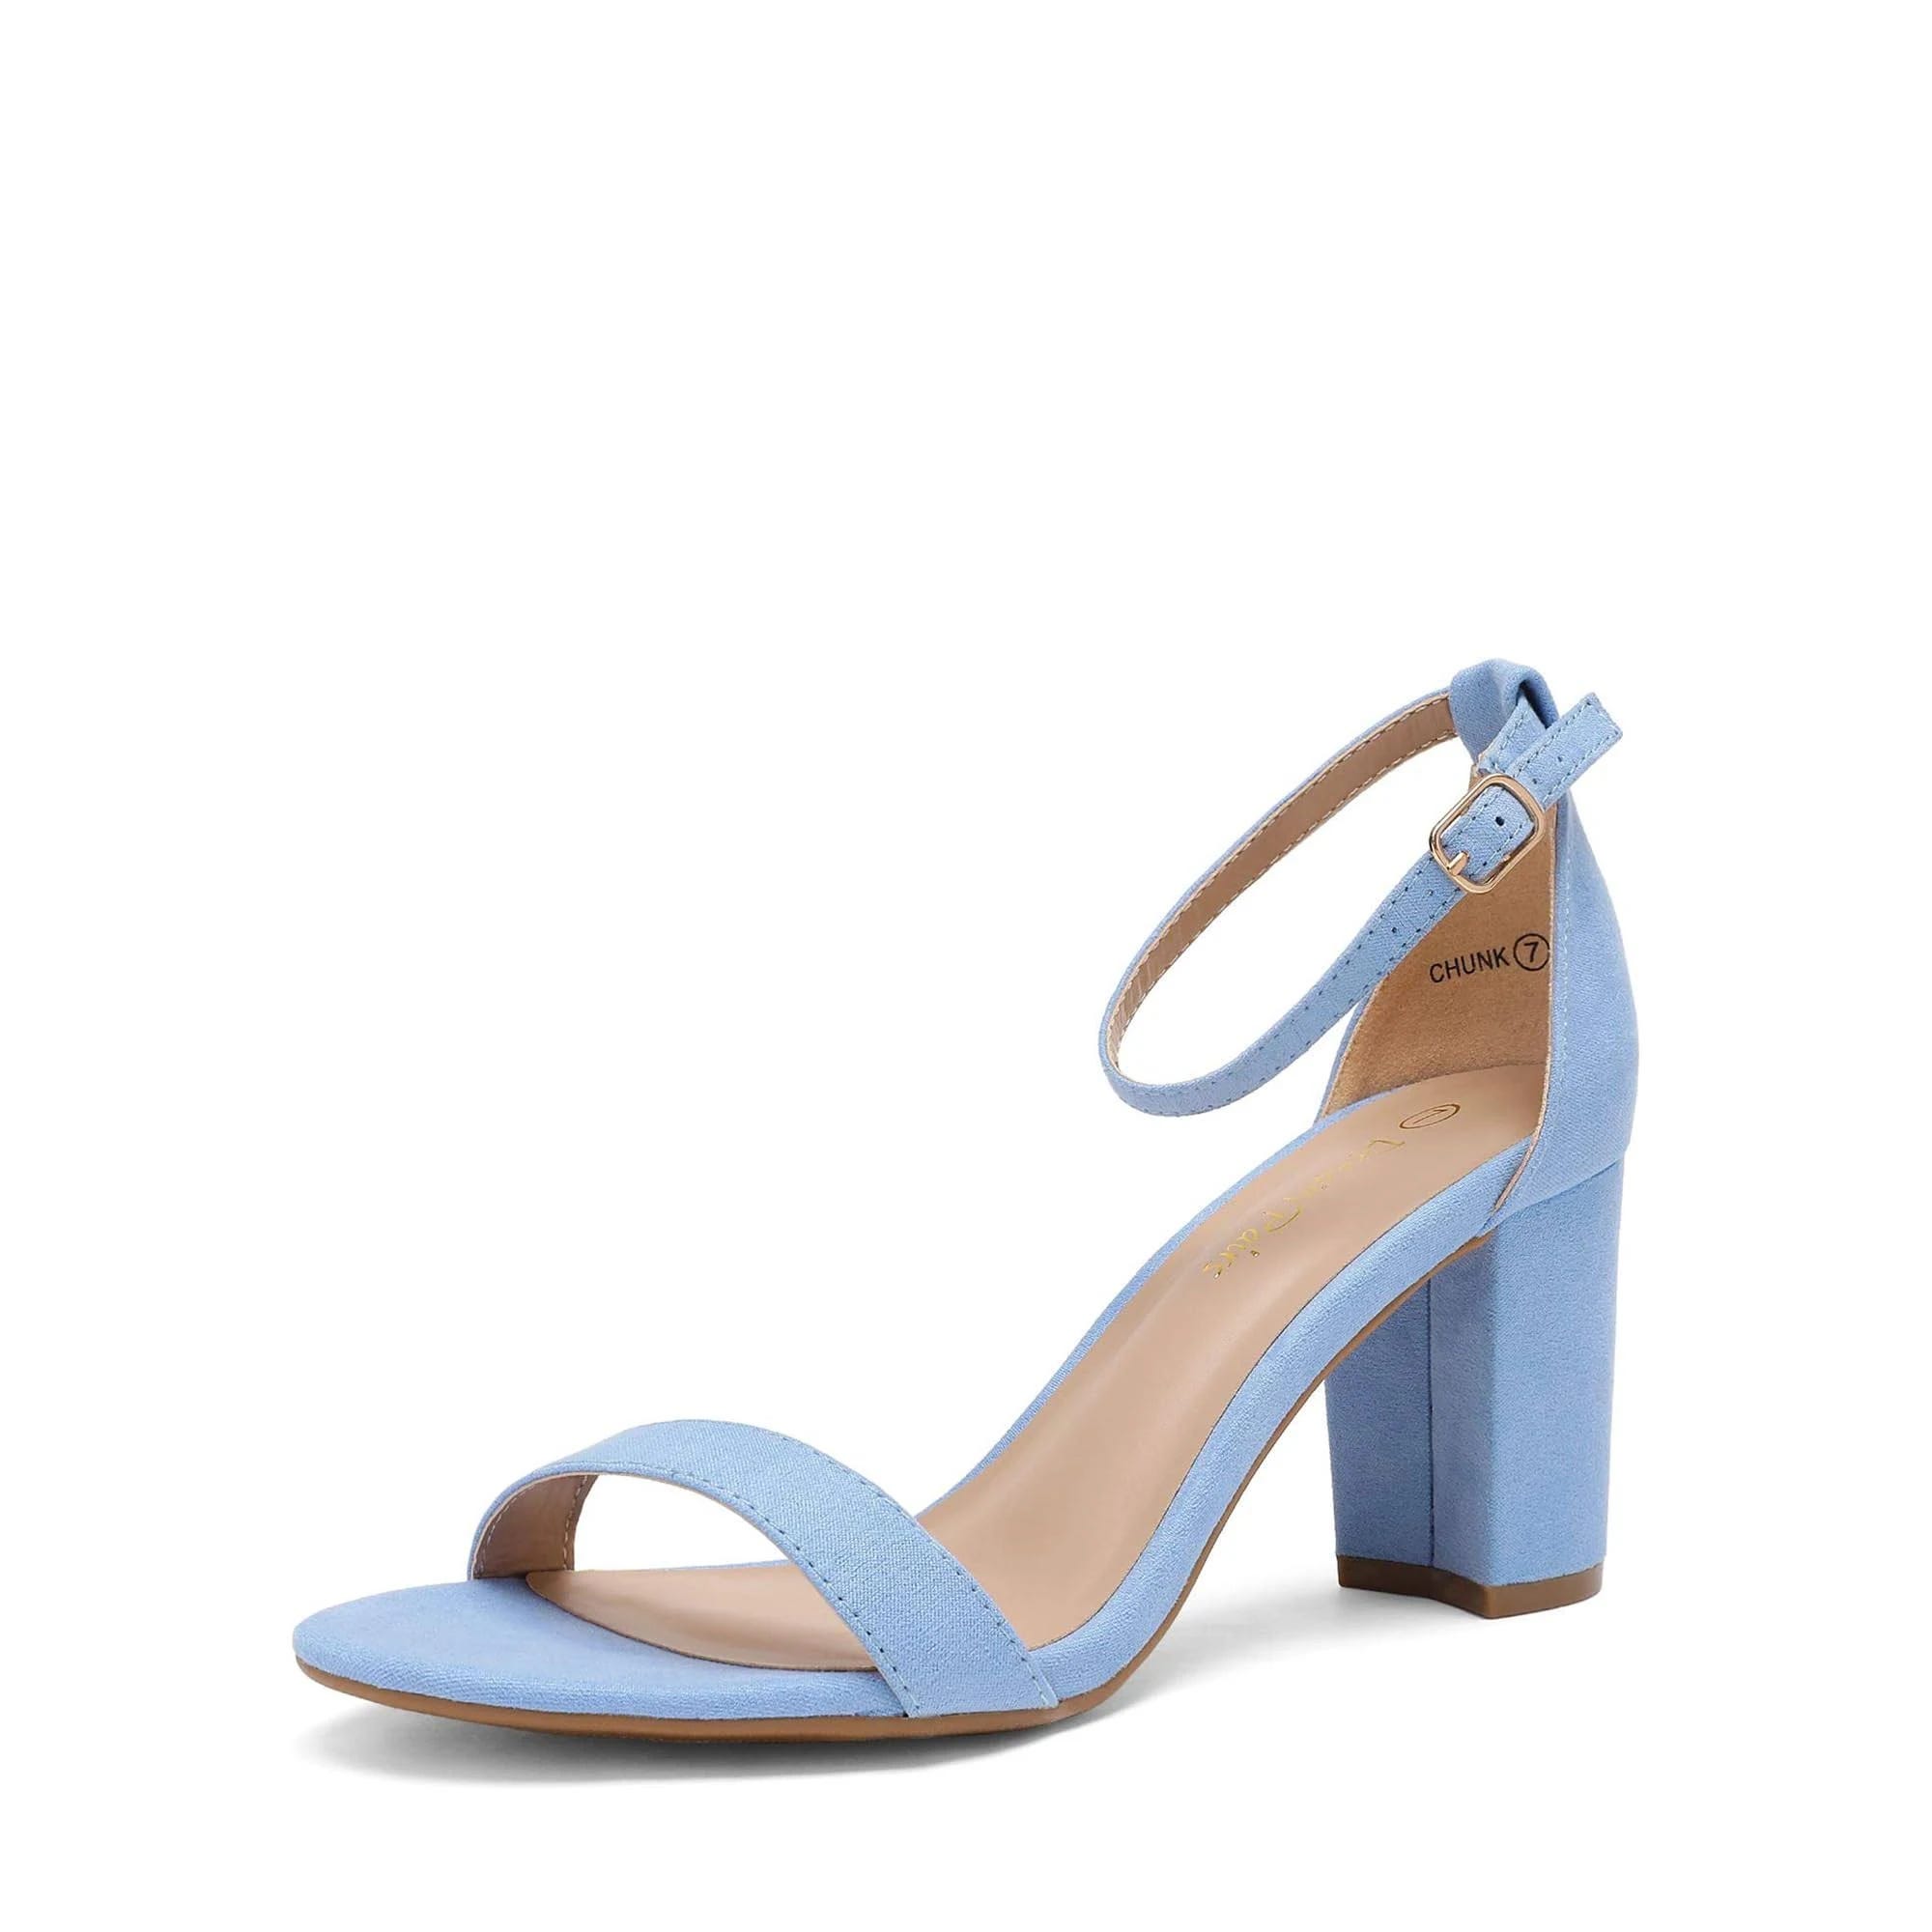 Dream Pairs Chunky Heel Sandals in Blue: Elegant and Comfortable | Image